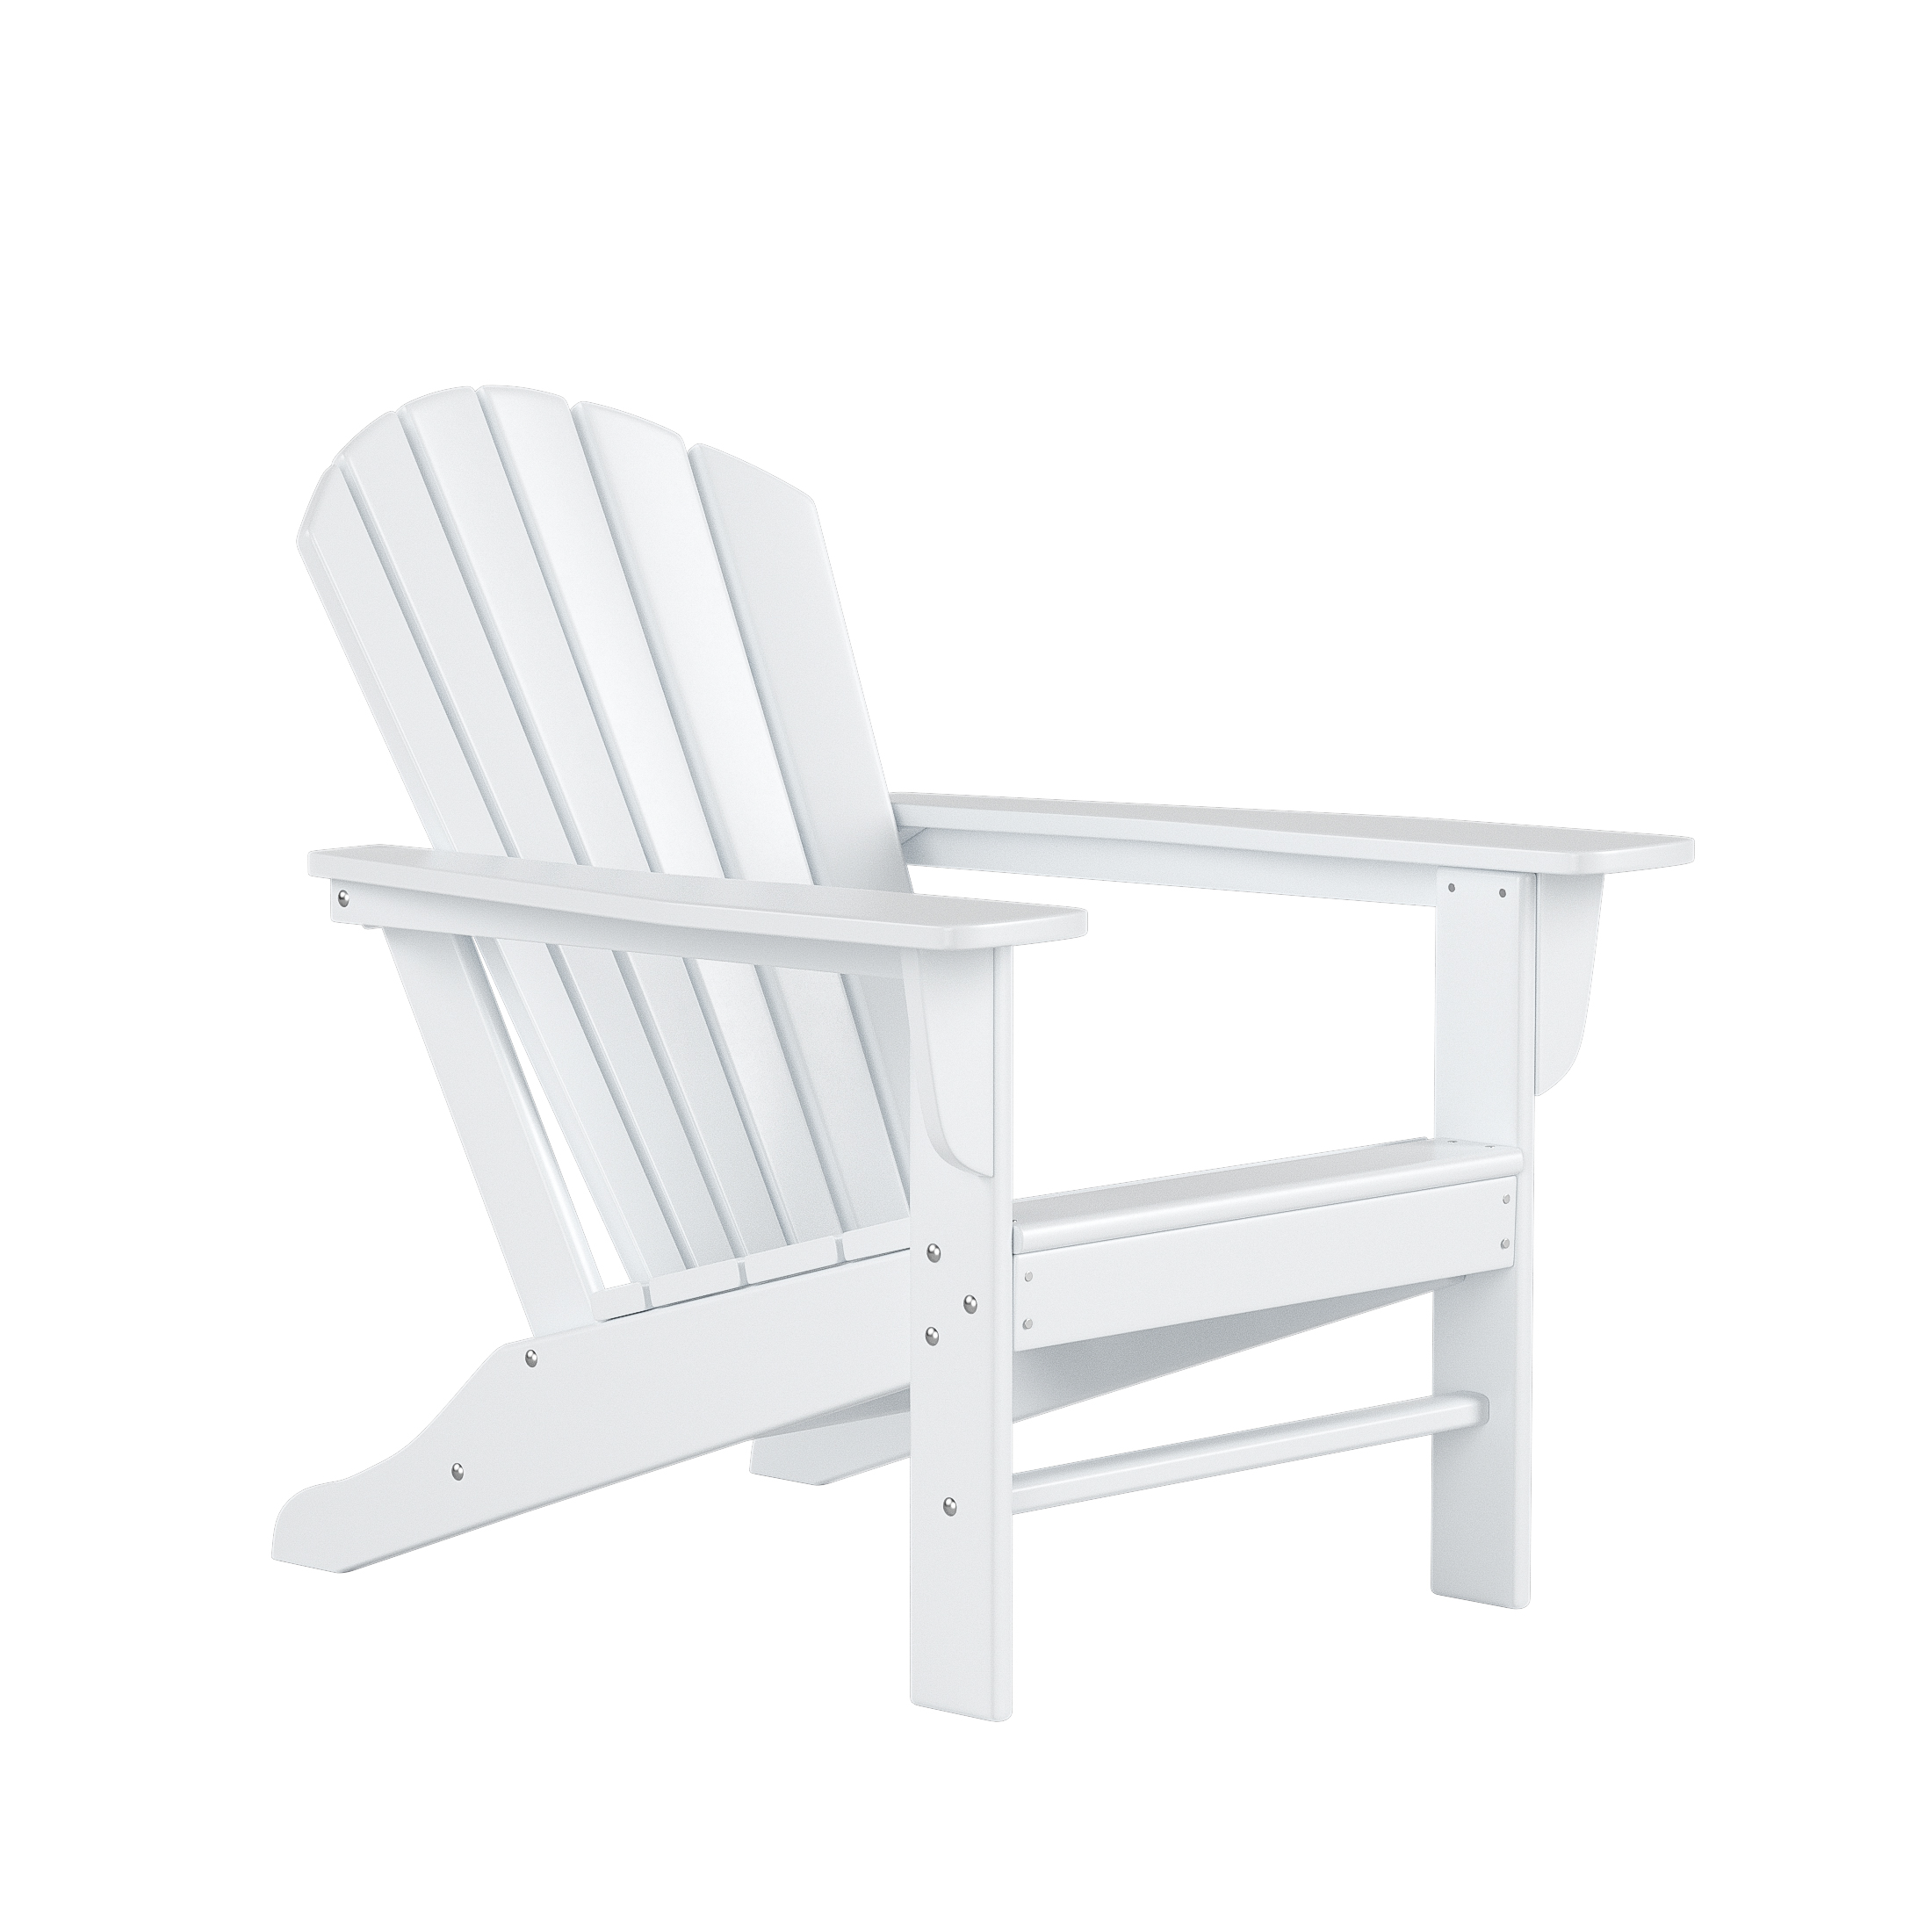 Westin Outdoor with Side Table HDPE Plastic Adirondack Chair - White (Set of 2) - image 3 of 5